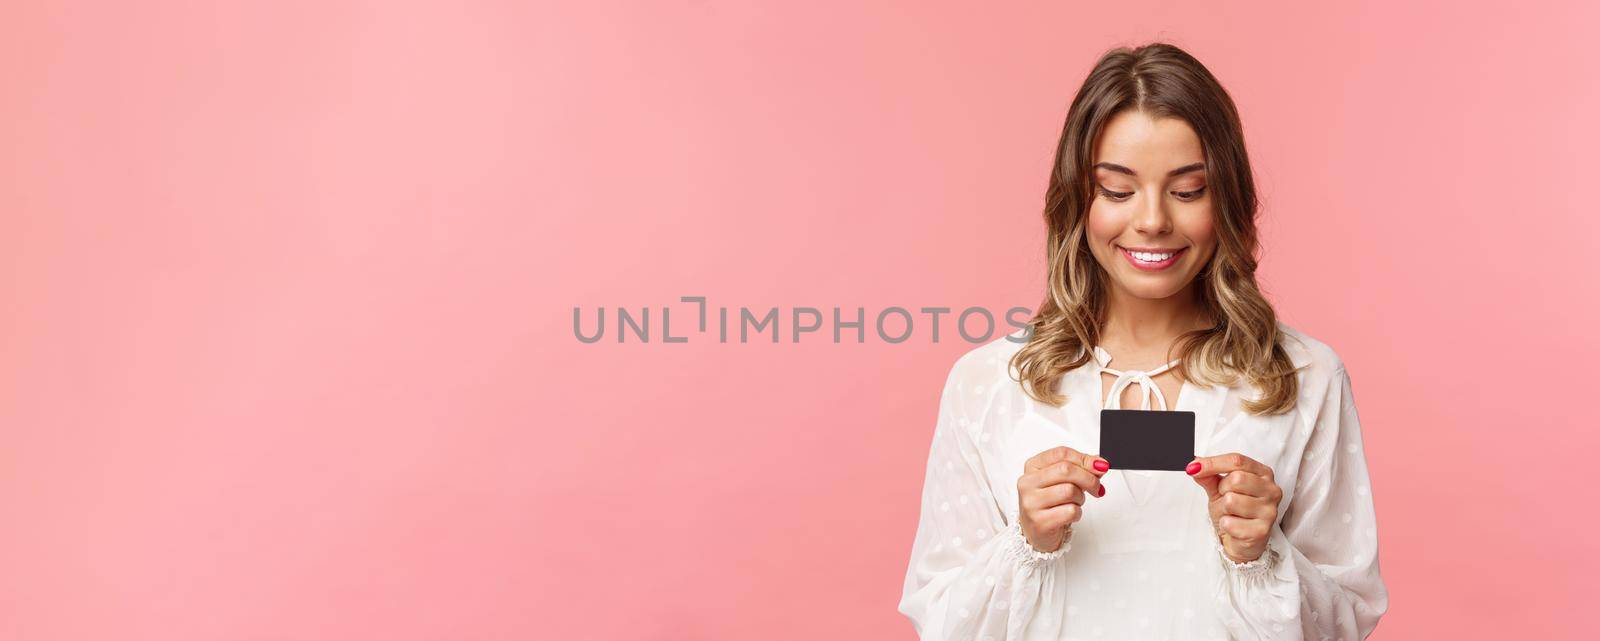 Close-up portrait of excited and amused blond girl in white dress, holding credit card and smiling thrilled, cant resist temptation to buy something, waste money online shopping, pink background.